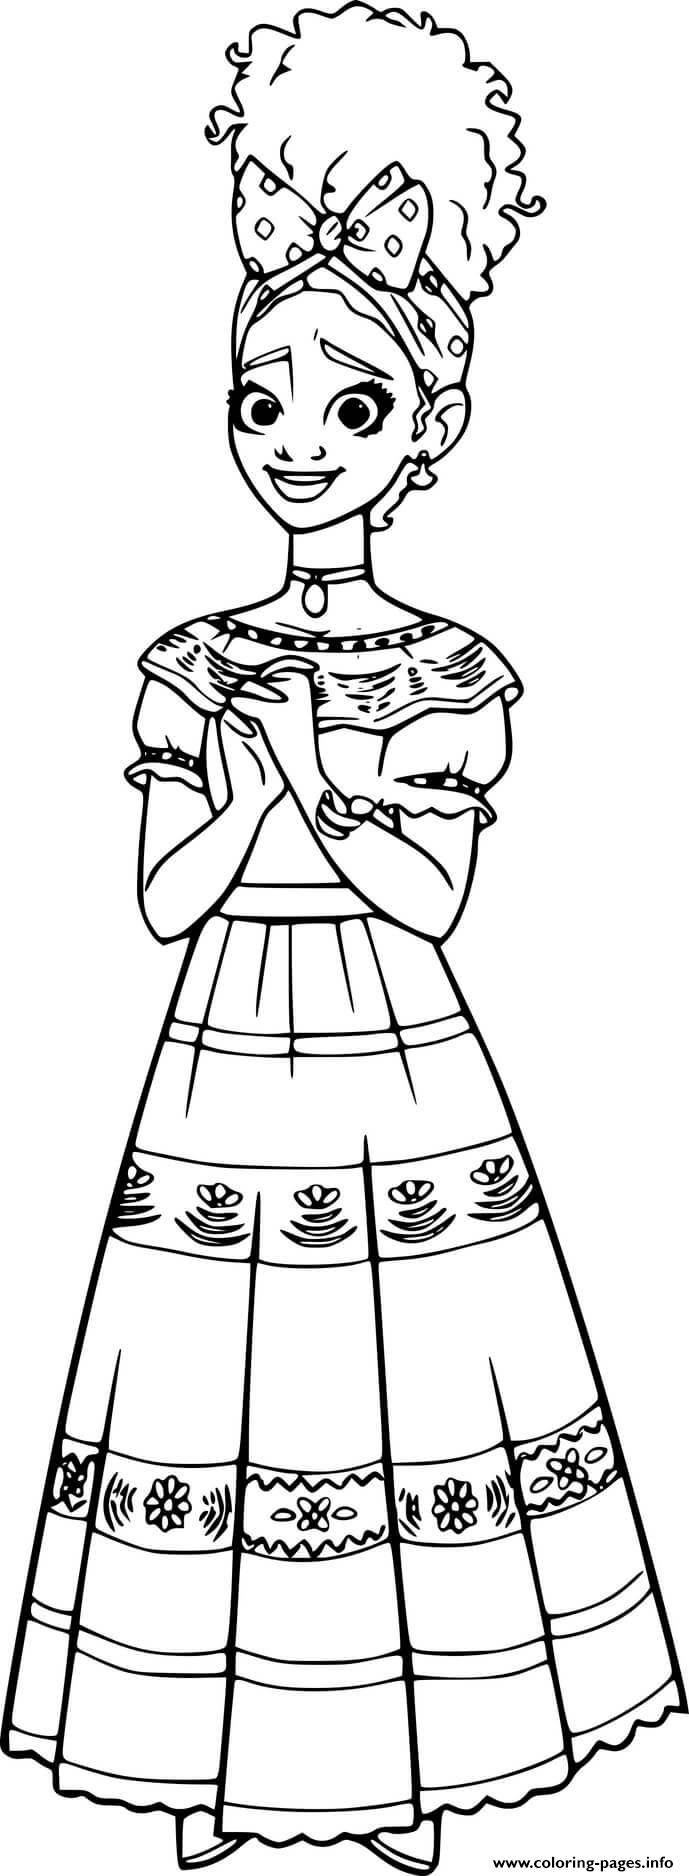 Dolores Madrigal Coloring Page